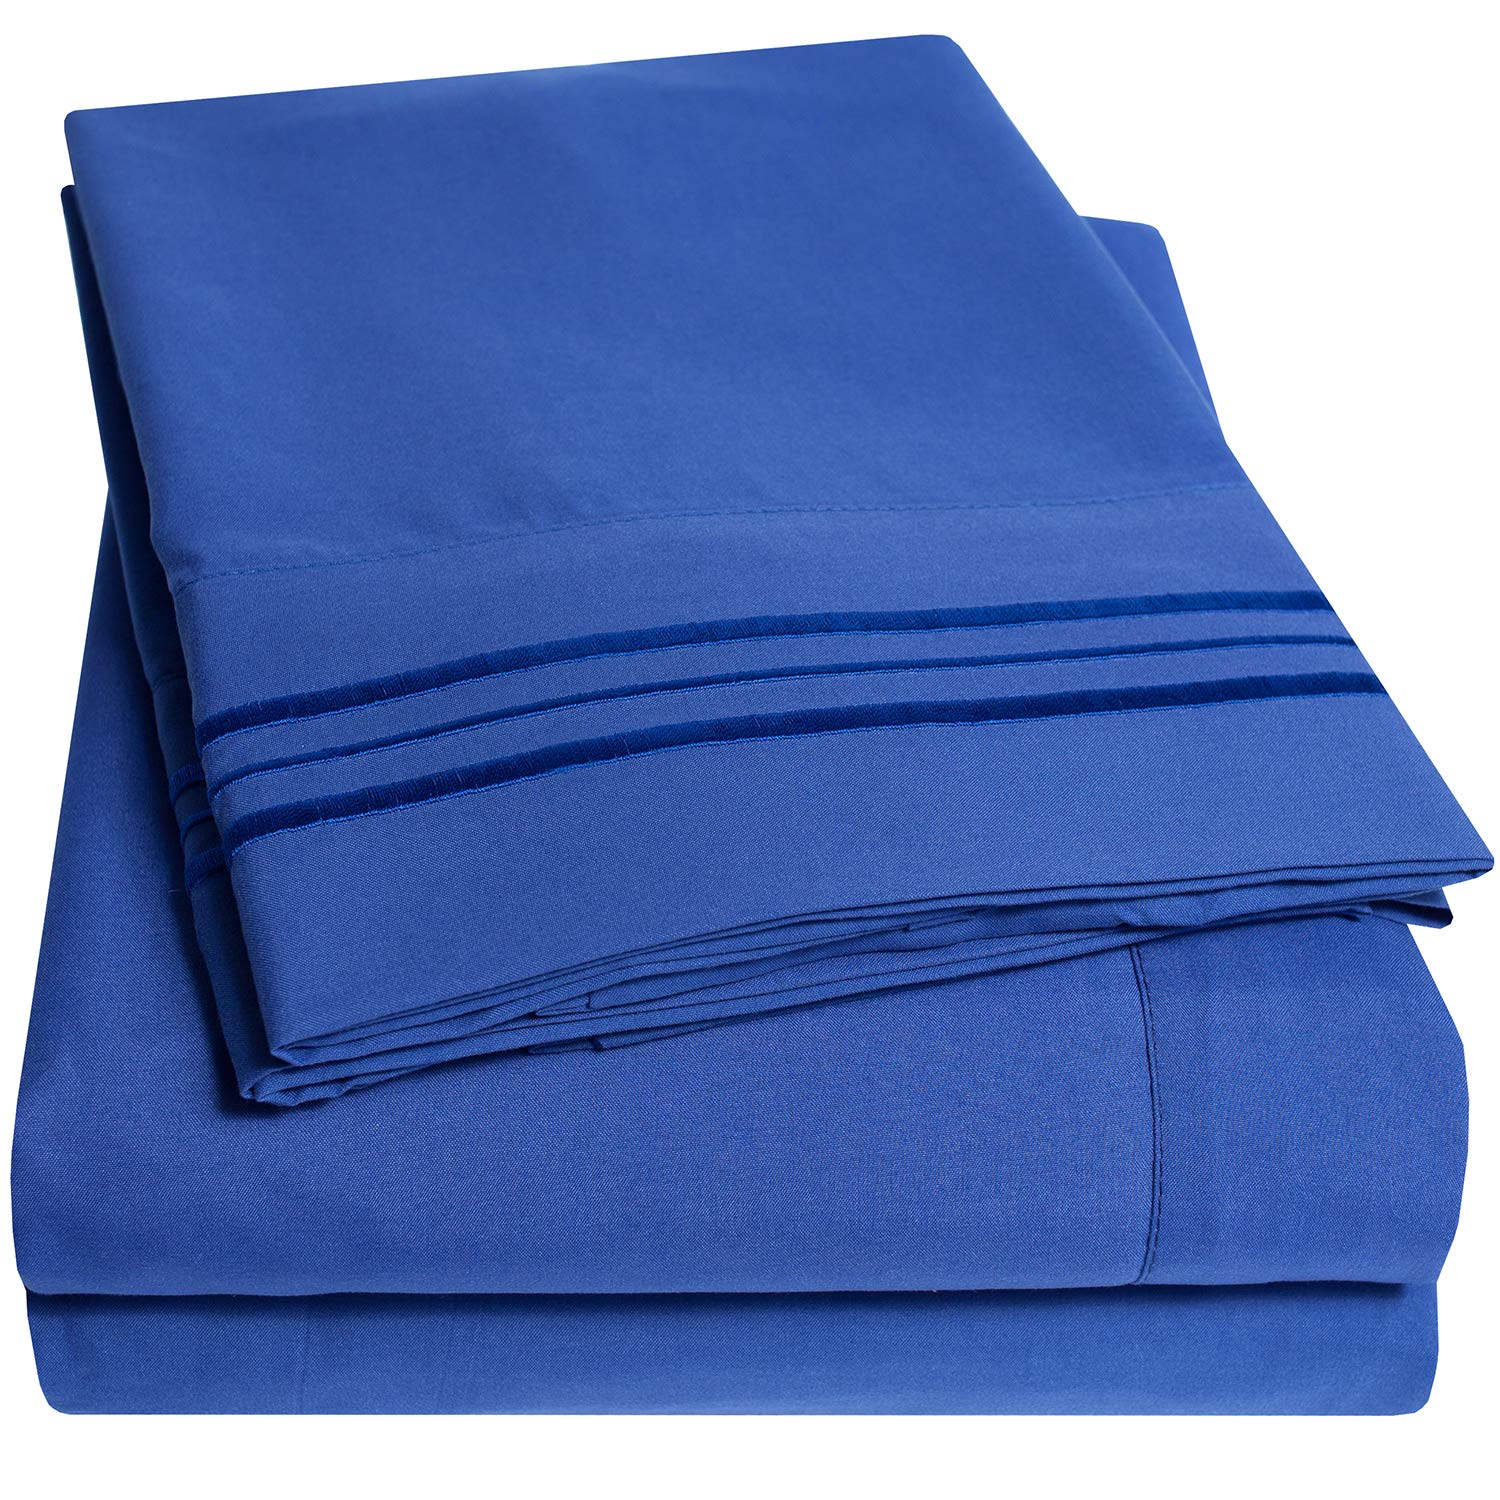 Book Cover 1500 Supreme Collection Queen Sheet Sets Royal Blue - Luxury Hotel Bed Sheets and Pillowcase Set for Queen Mattress - Extra Soft, Elastic Corner Straps, Deep Pocket Sheets, Queen Royal Blue